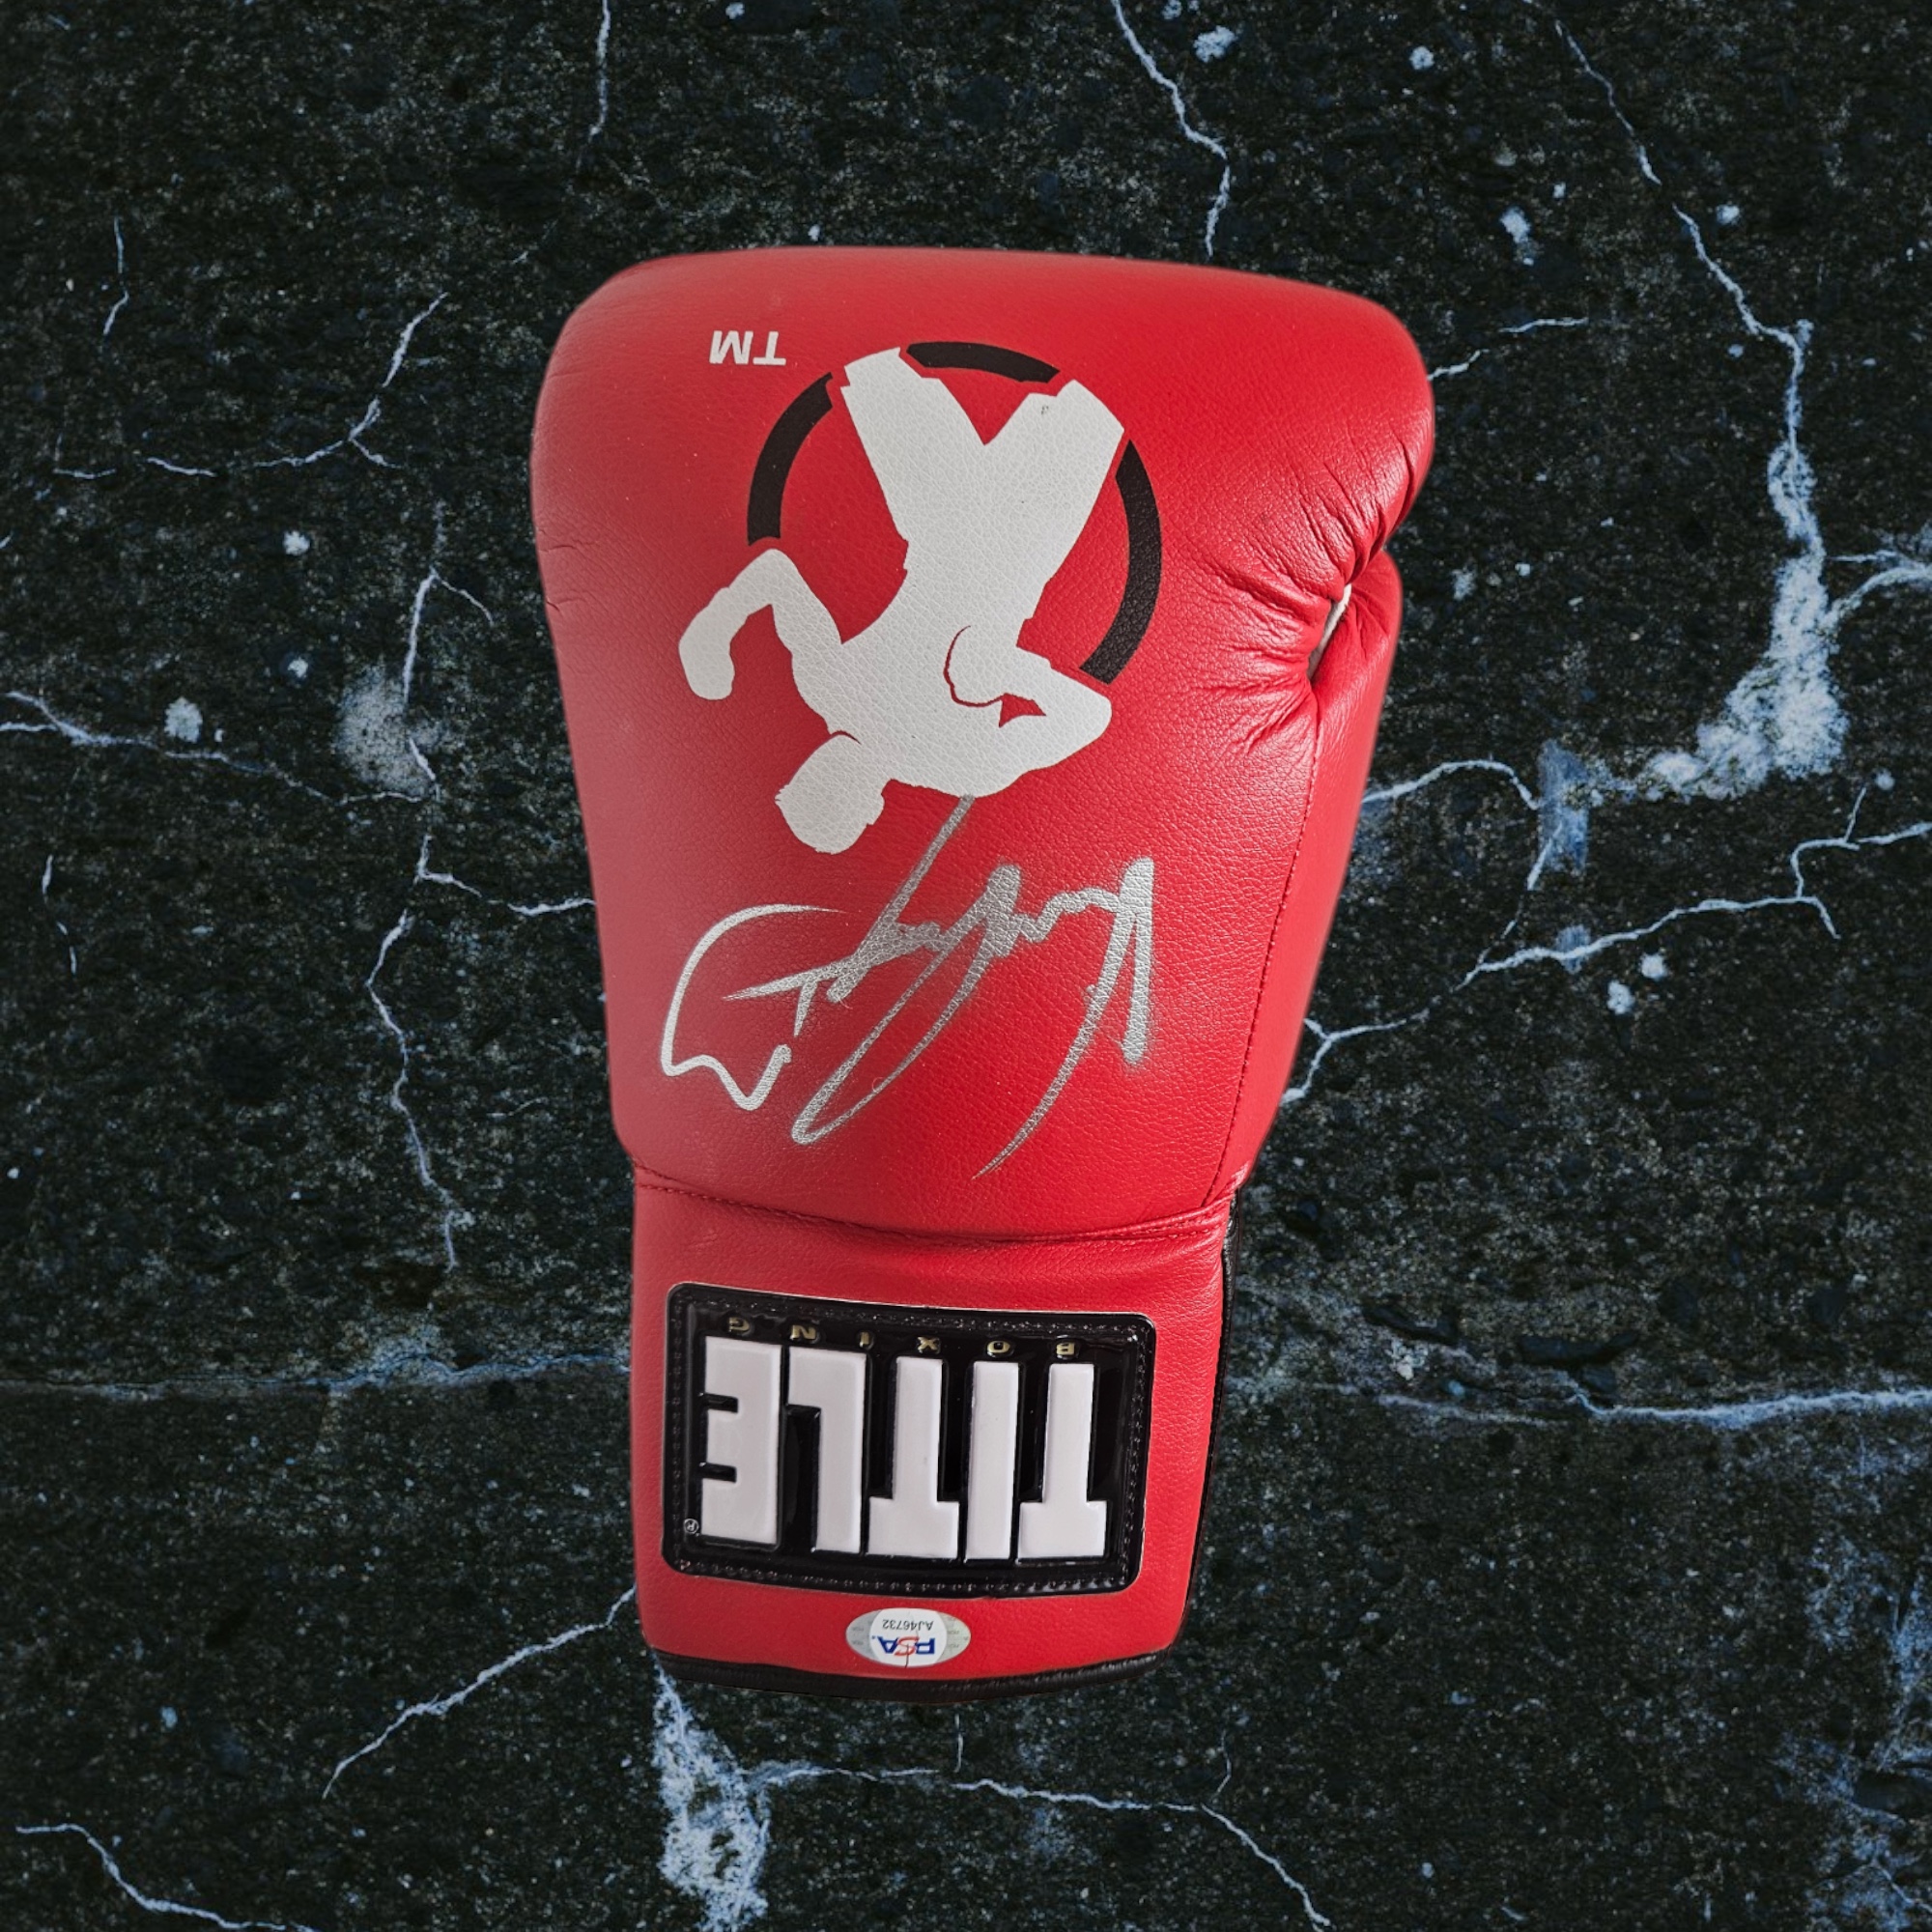 Ryan Garcia signed red Title boxing glove. Ryan Garcia (born August 8, 1998) is an American